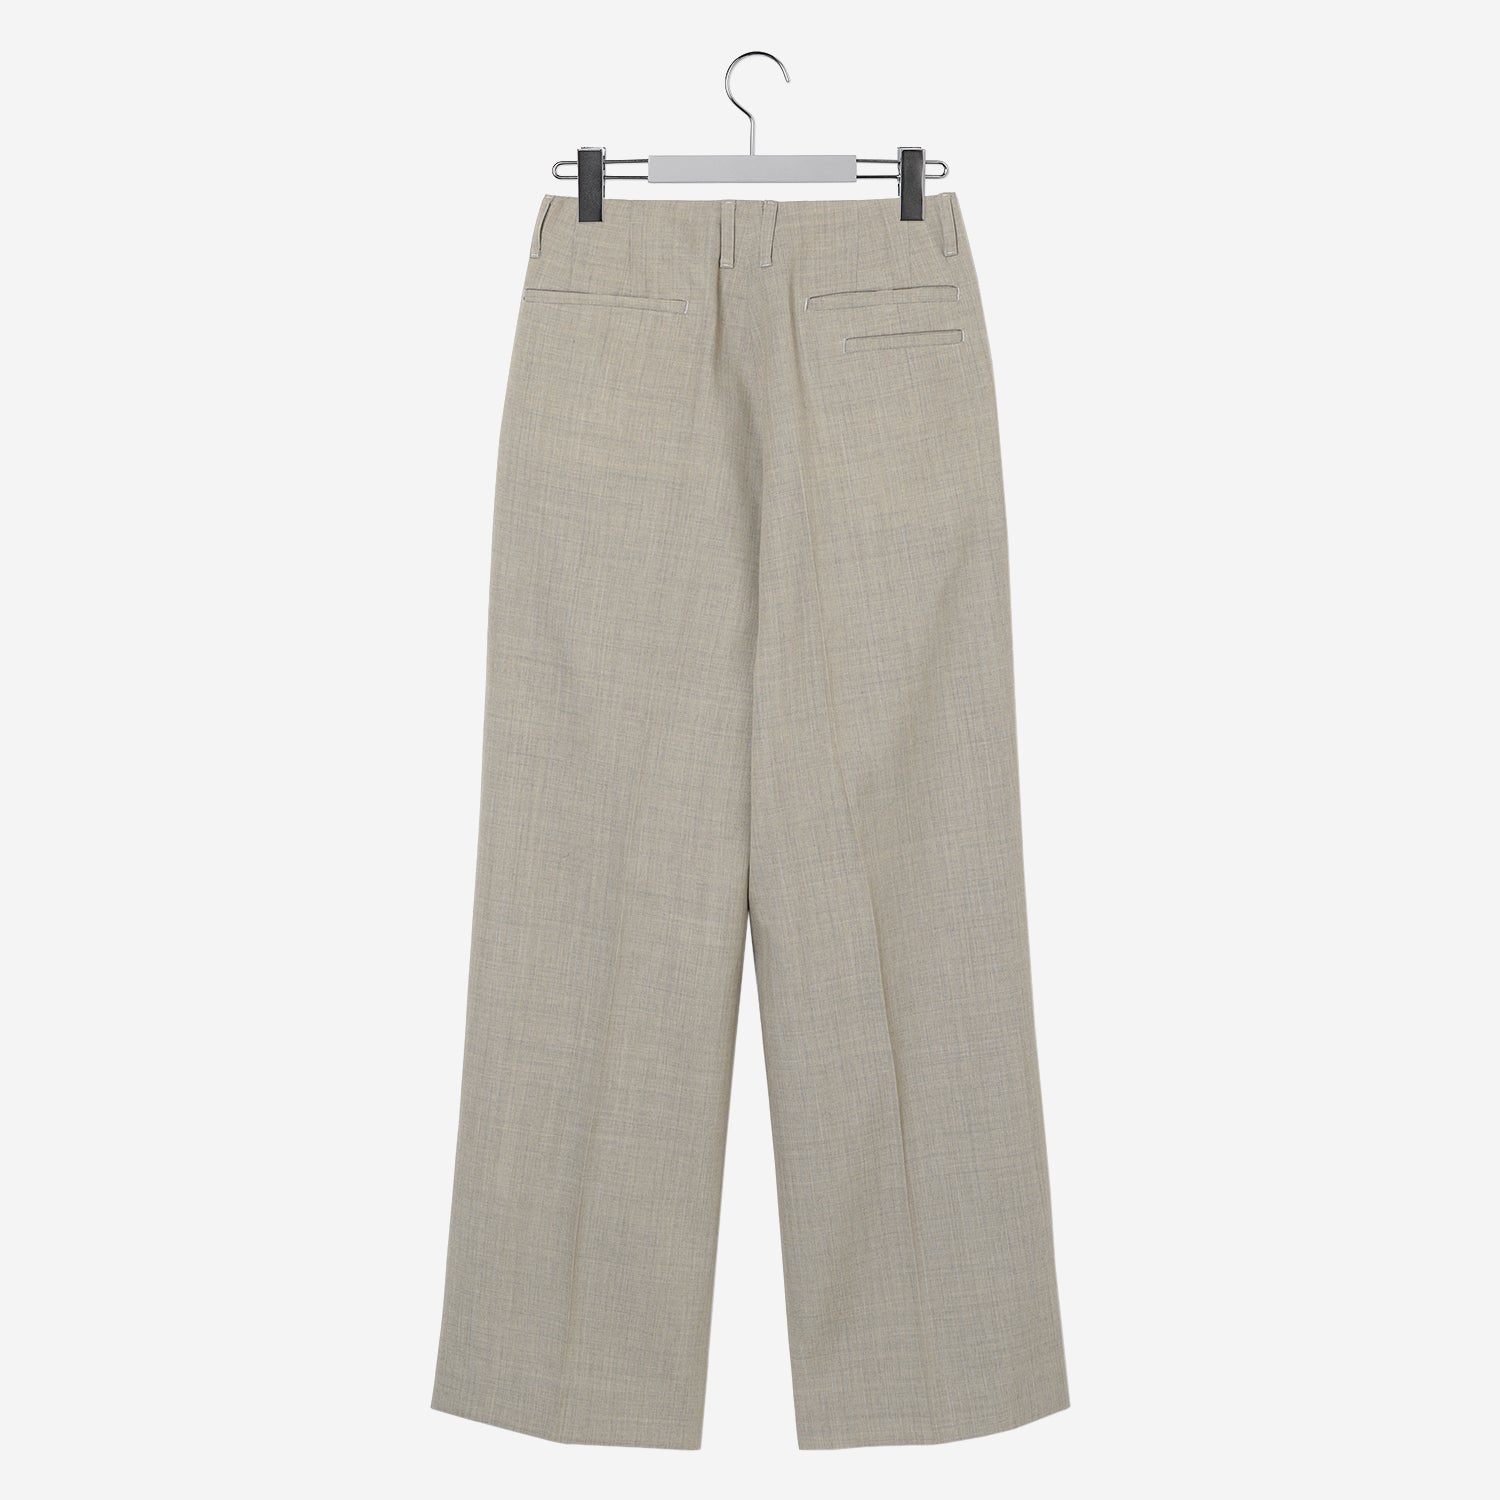 Classic Tailored Pants / beige